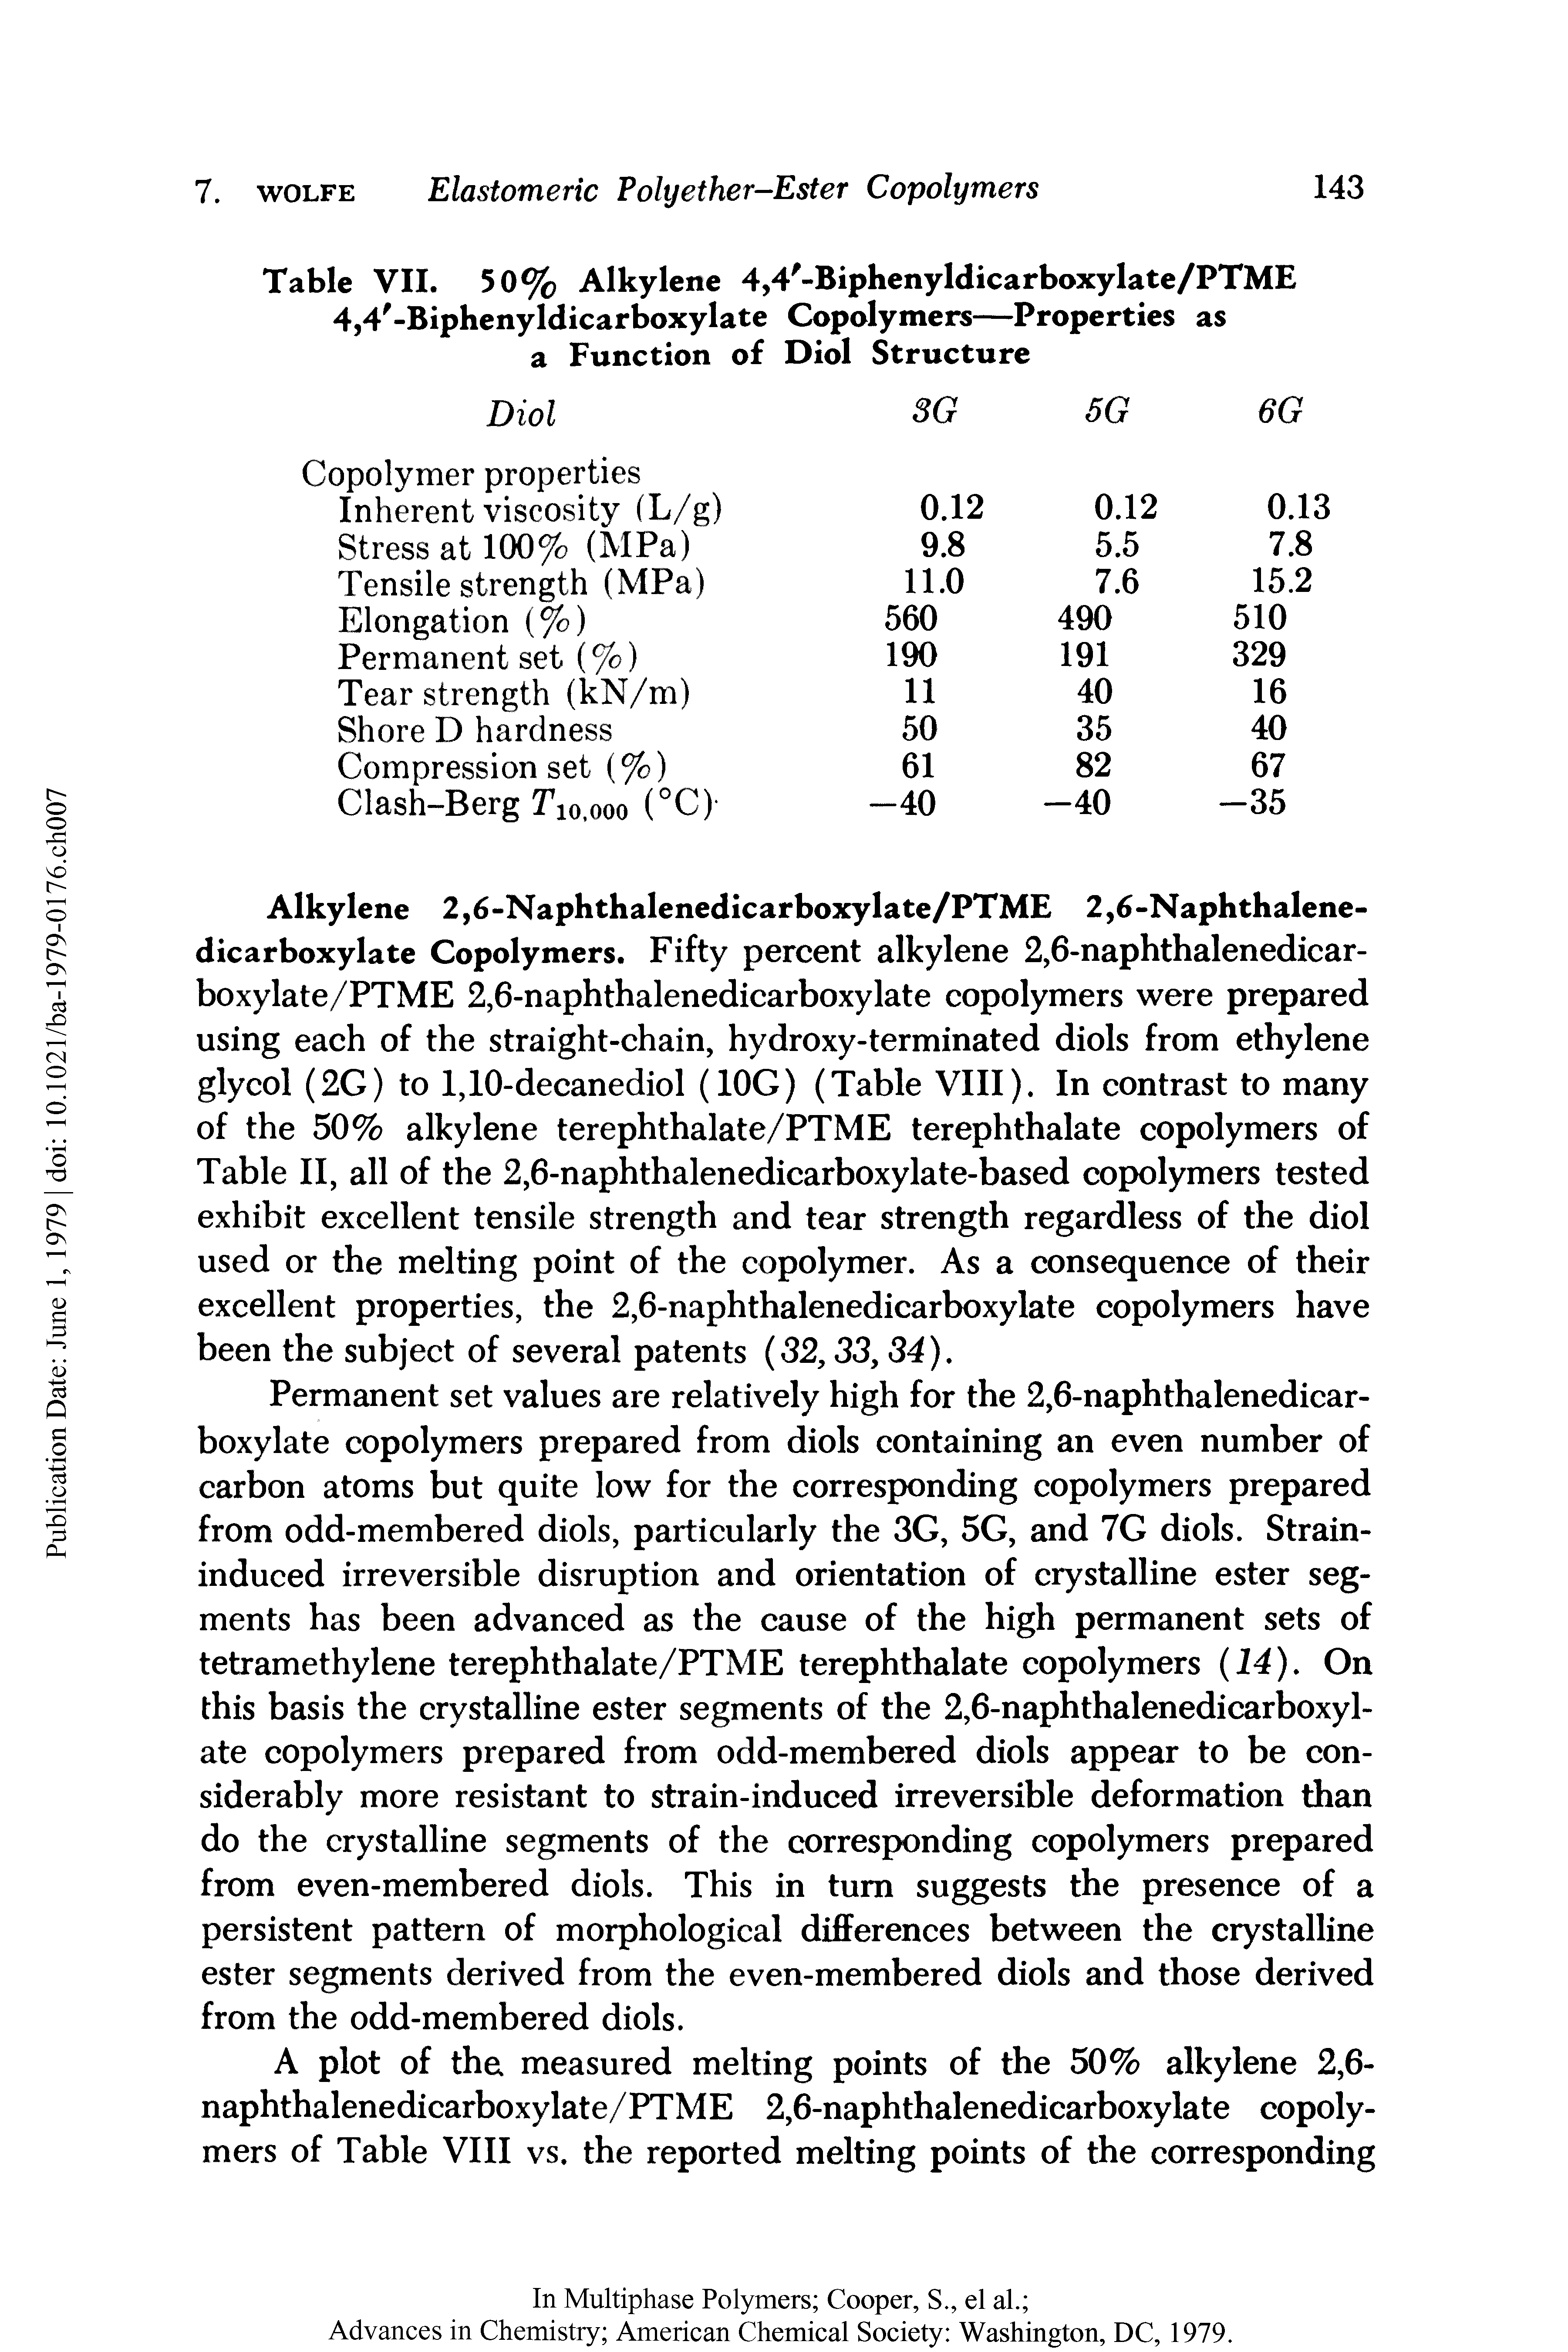 Table VII. 50% Alkylene 4,4 -Biphenyldicarboxylate/PTME 4,4 -Biphenyldicarboxylate Copolymers—Properties as a Function of Diol Structure...